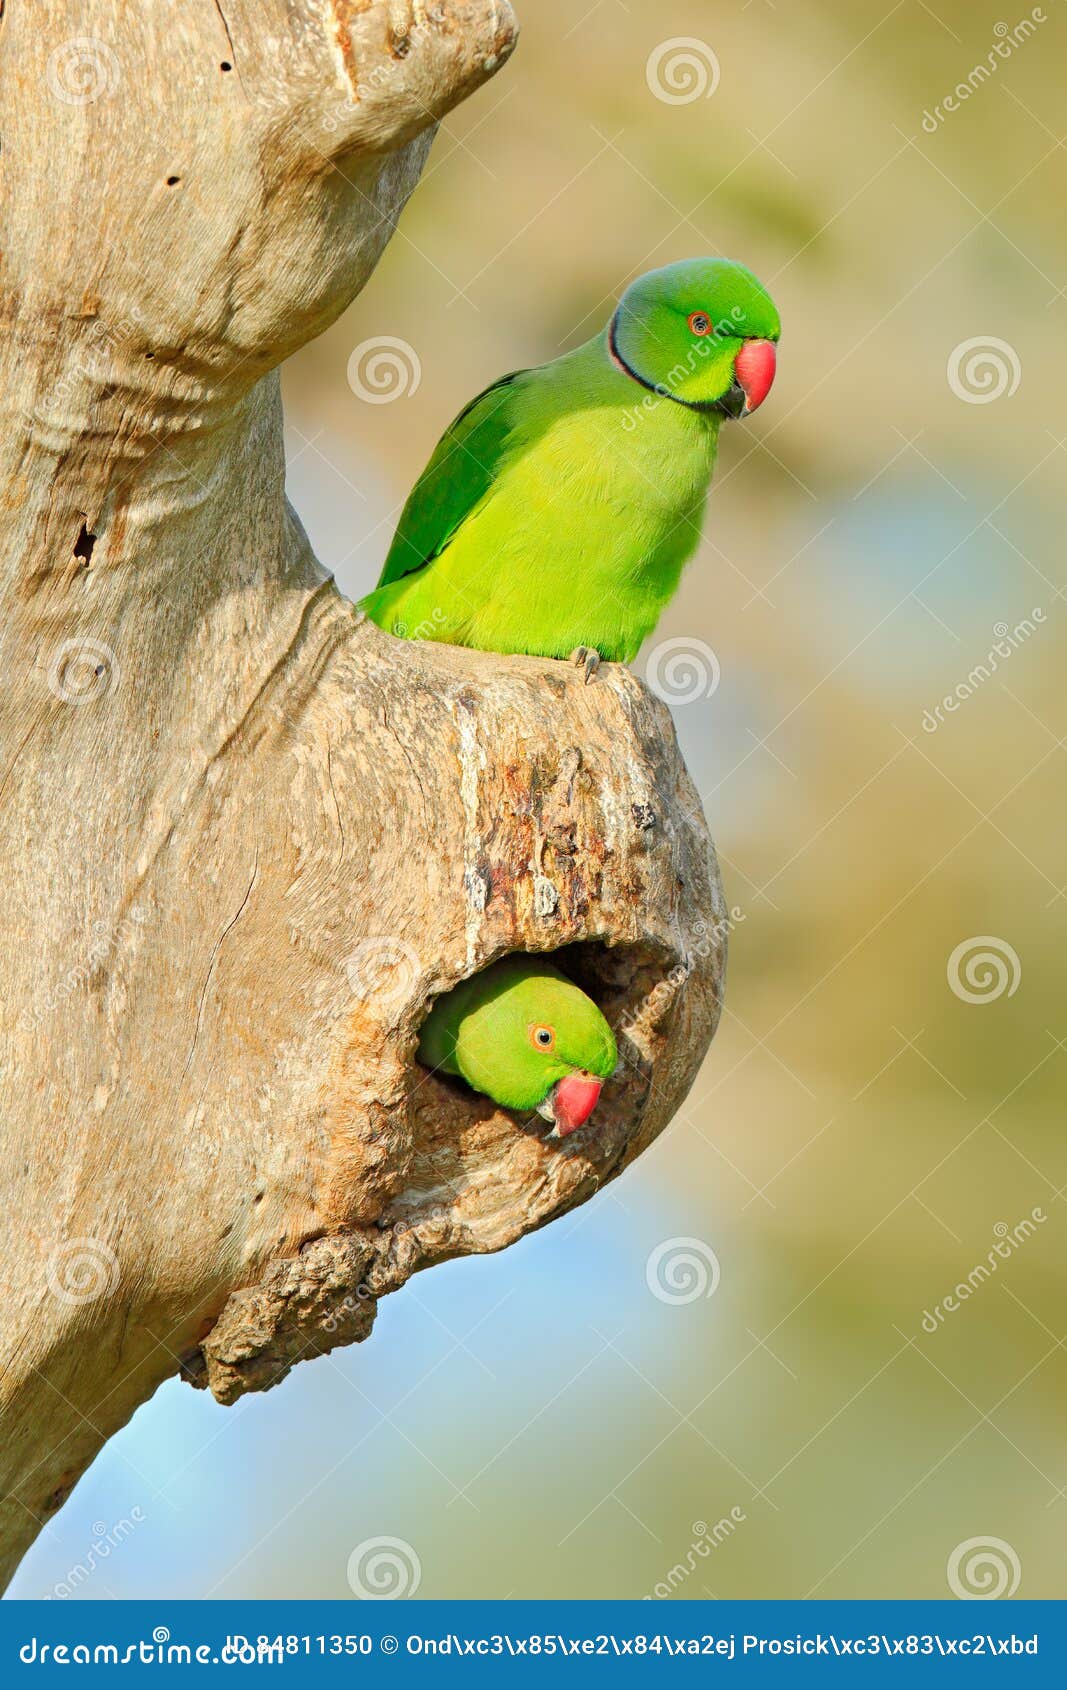 Rose-ringed Parakeet + Birds of the Week Invitation XXXVII – Don't hold  your breath